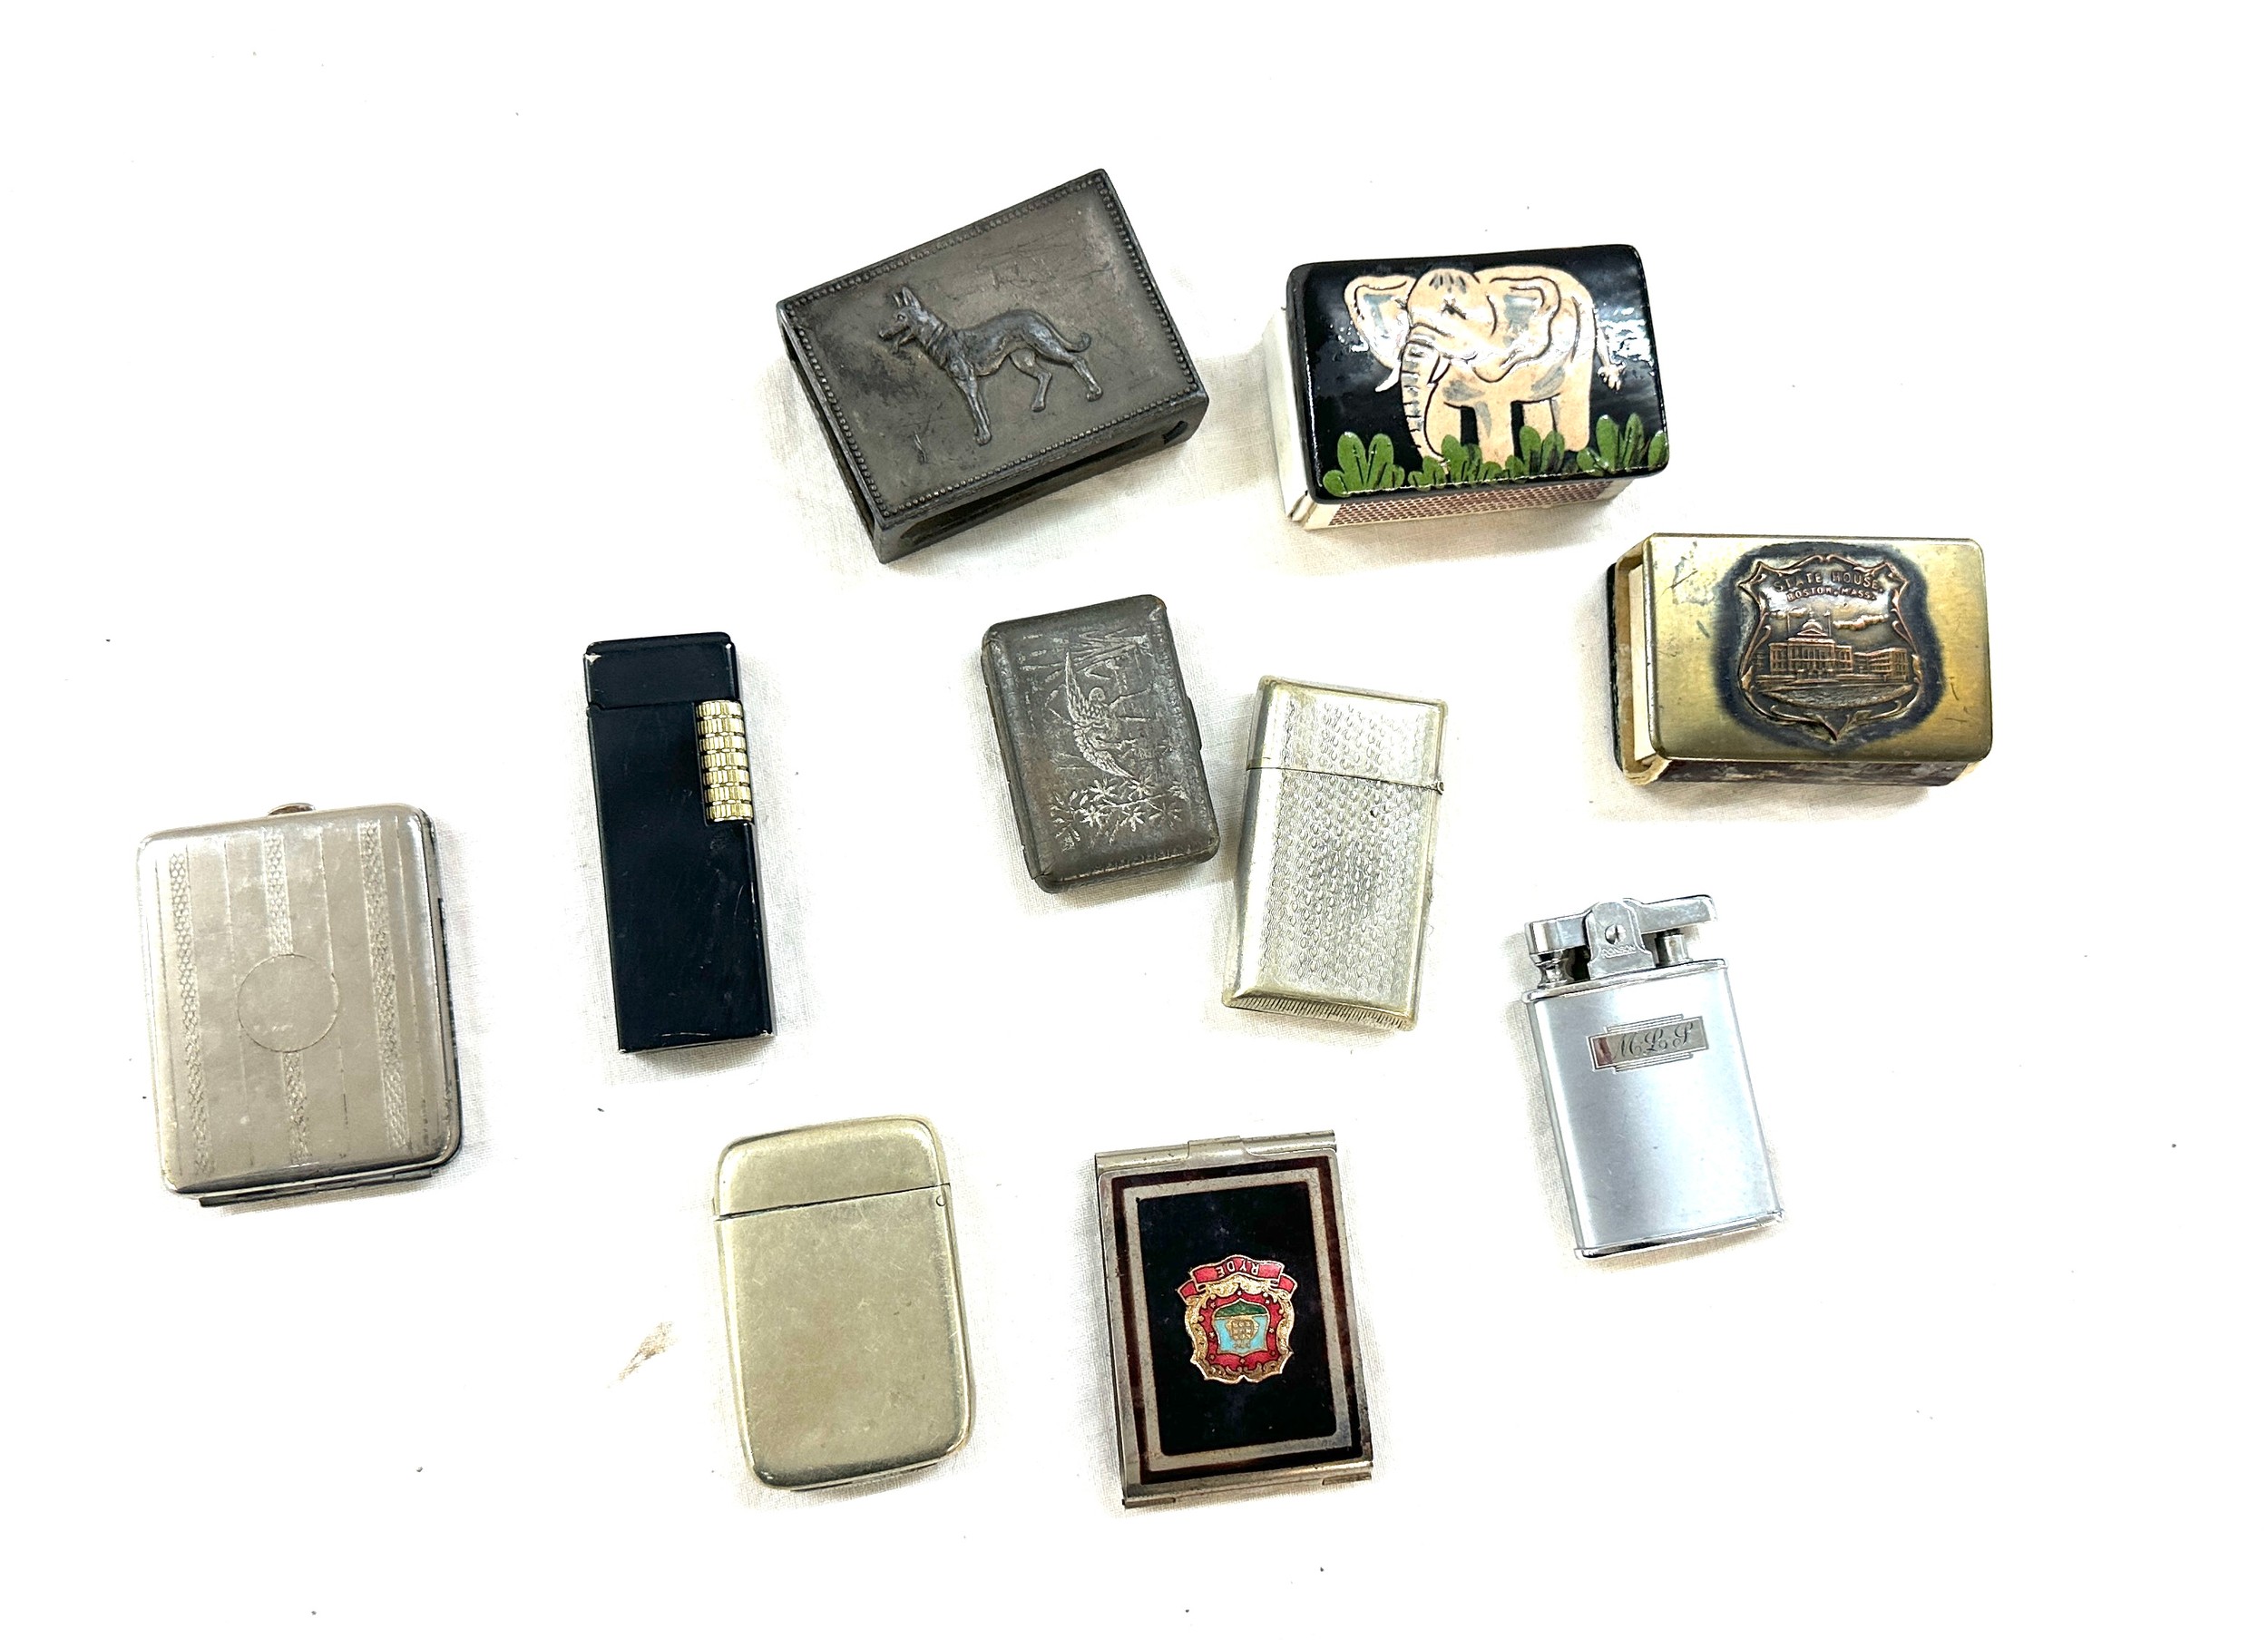 Match cases and lighters